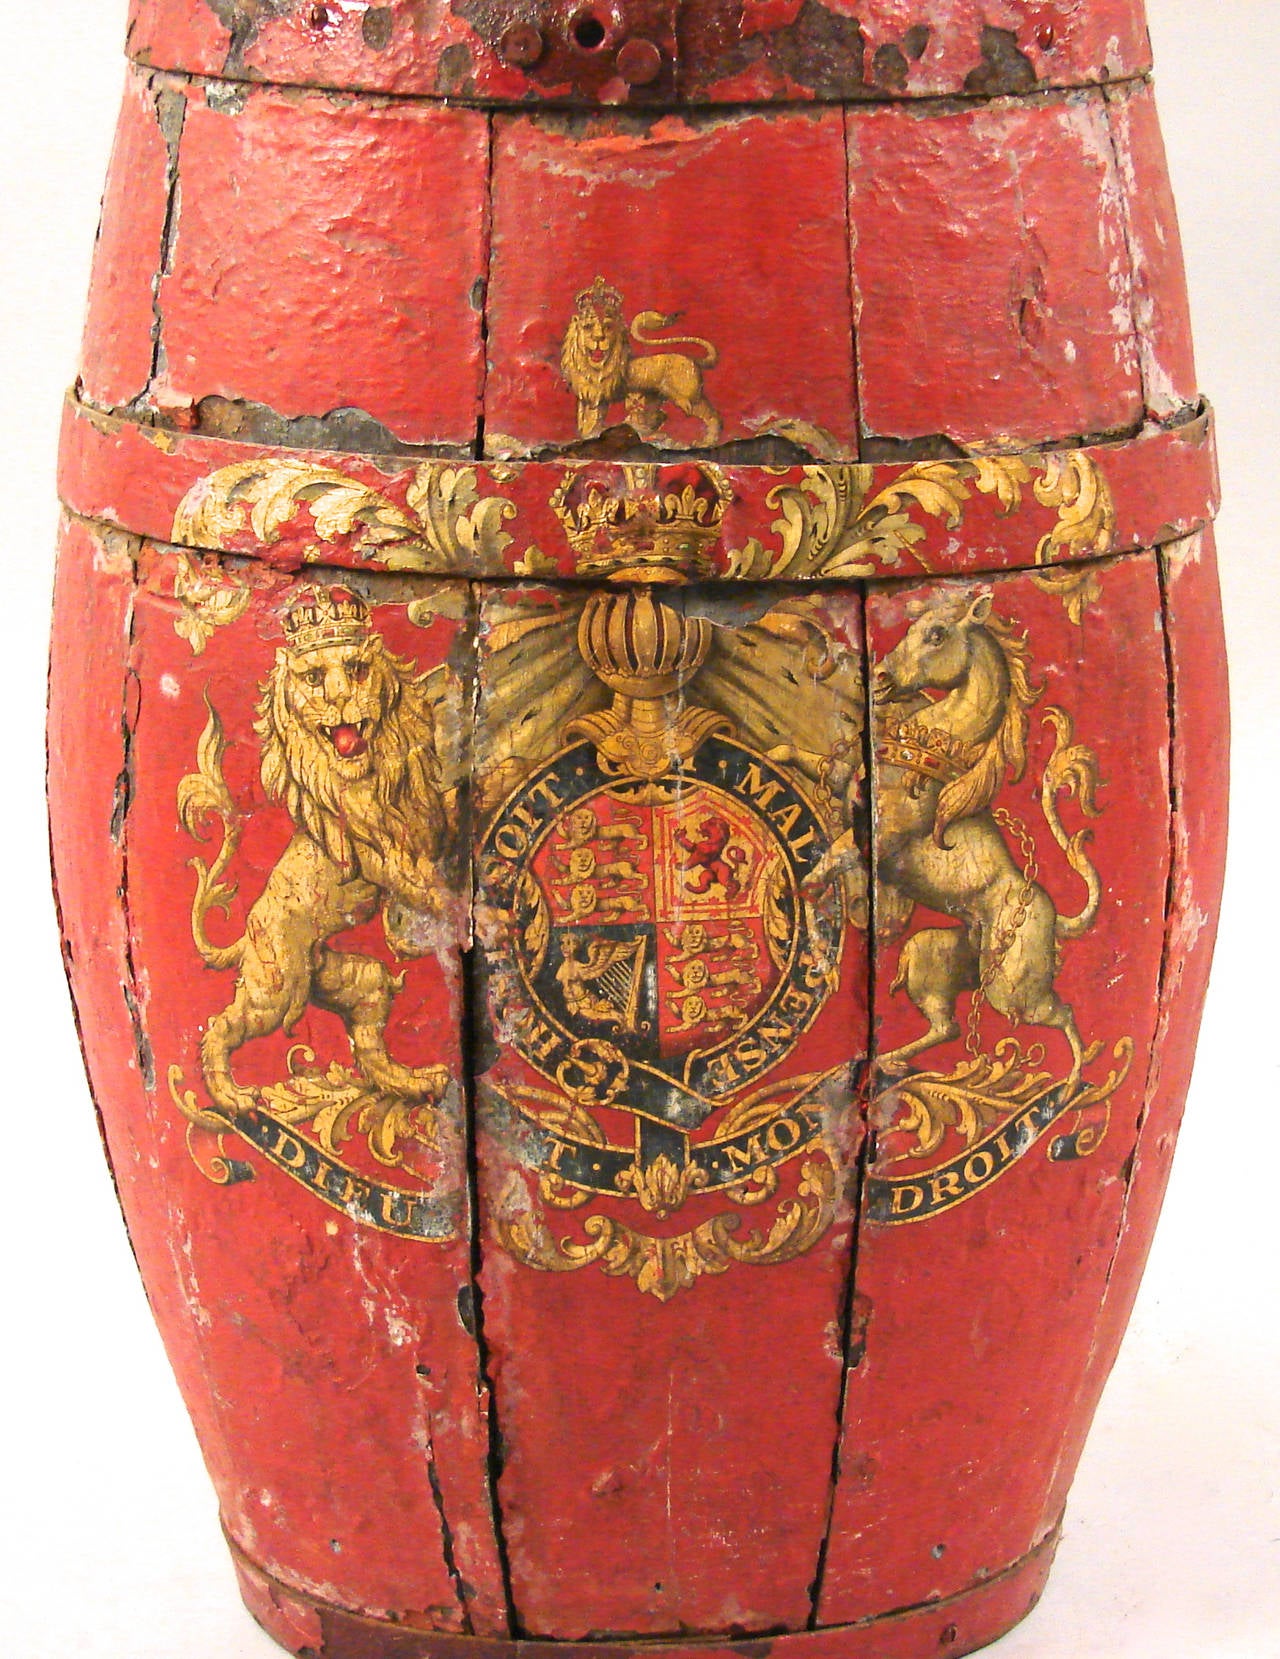 A well-used red painted English barrel with four iron straps decorated with the English coat of arms. Great weathered surface with old paint.